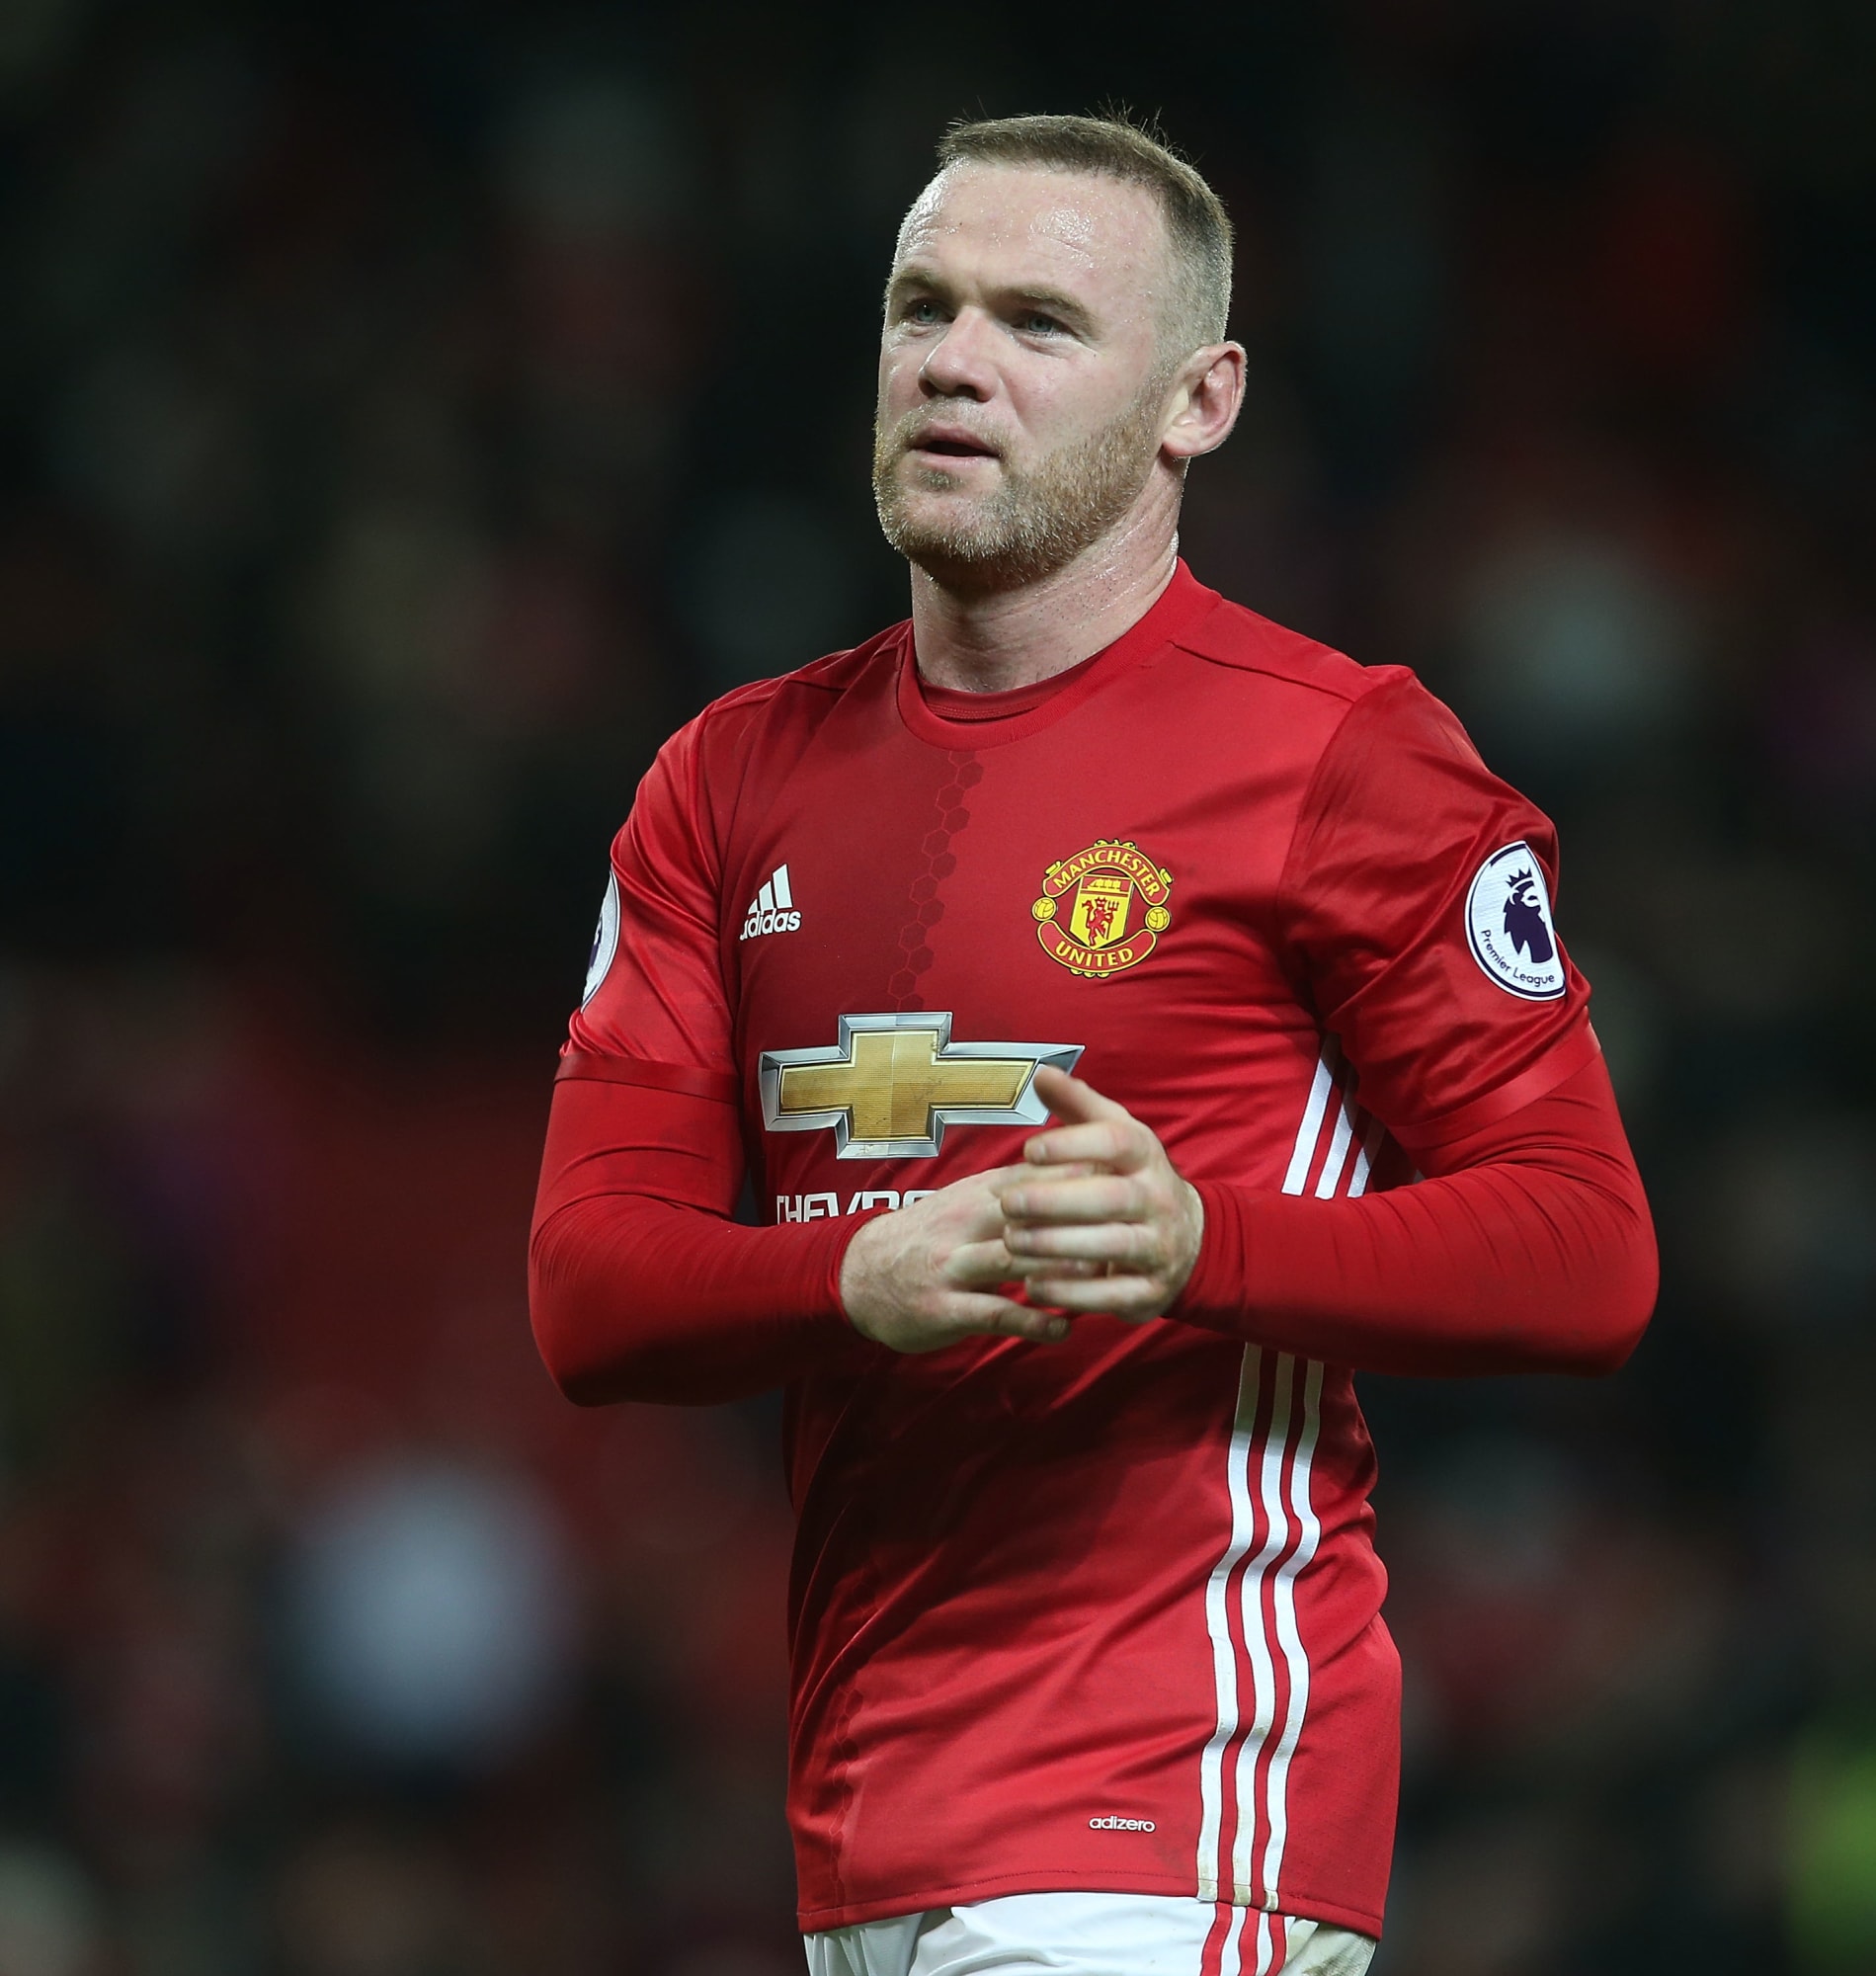 Will Wayne Rooney retire at Manchester United or elsewhere?